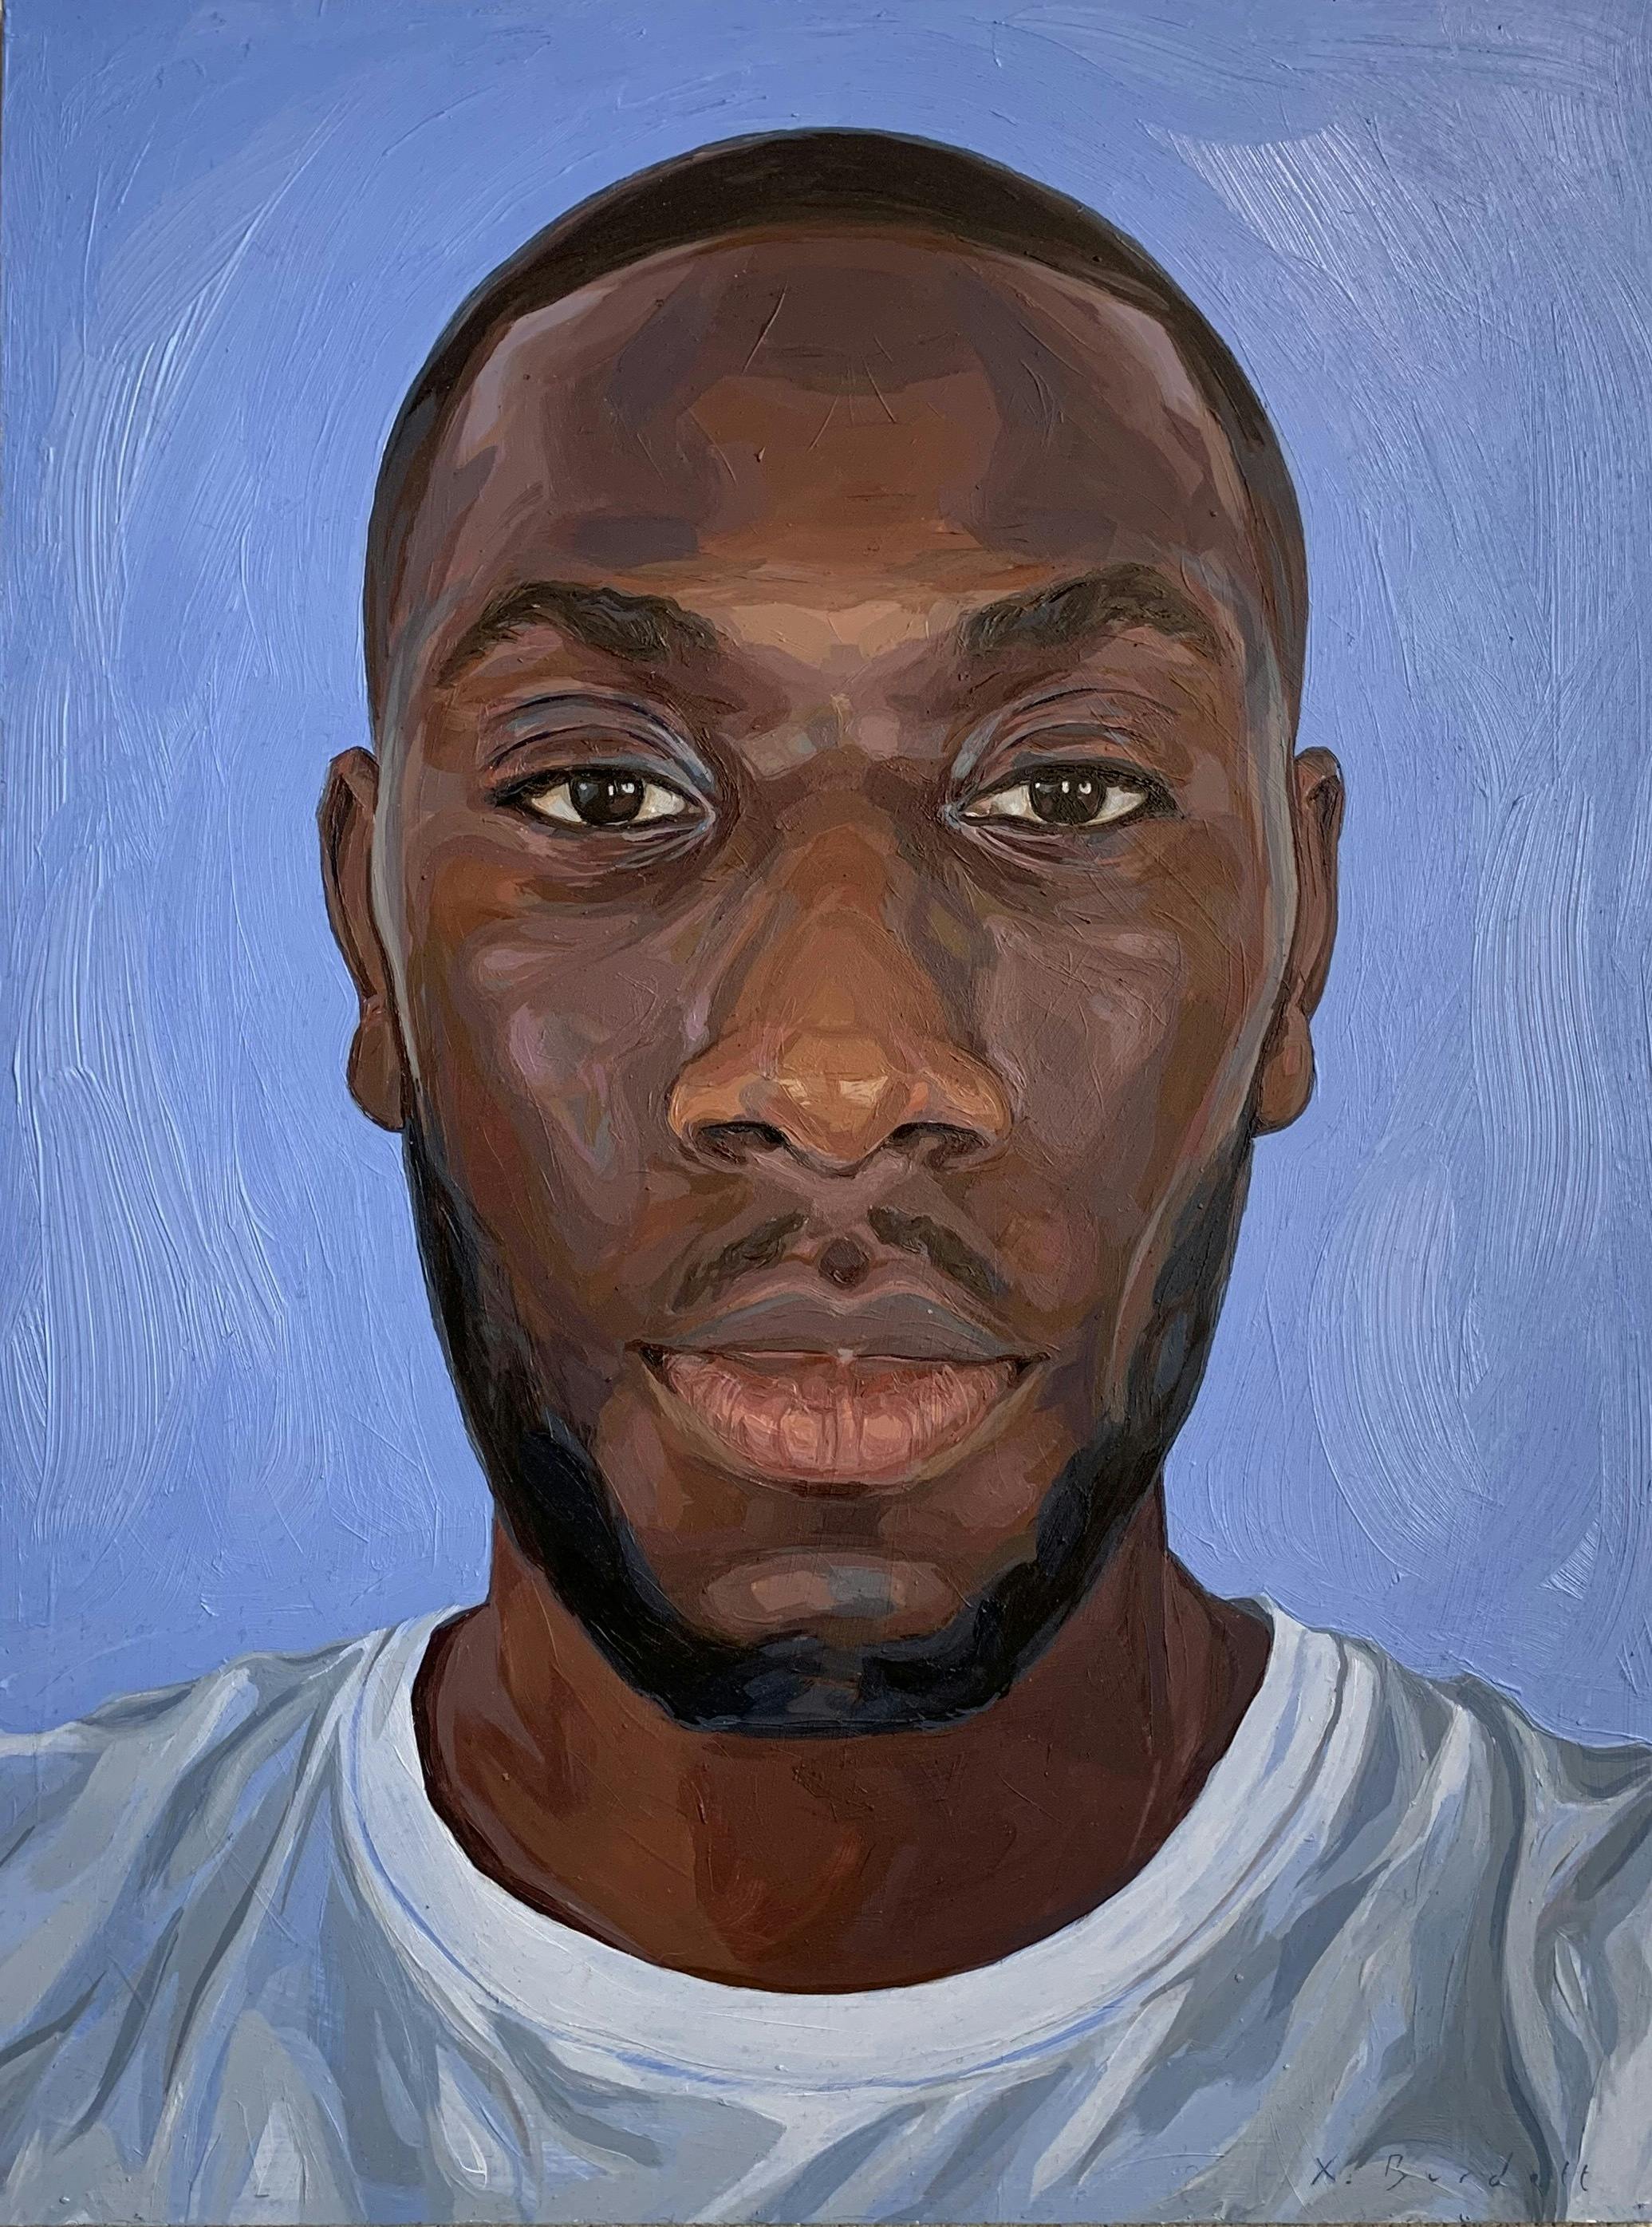 A painting of Afolabi Alli, a portrait of a black man with short black hair and beard wearing a white tshirt in front of a blue background